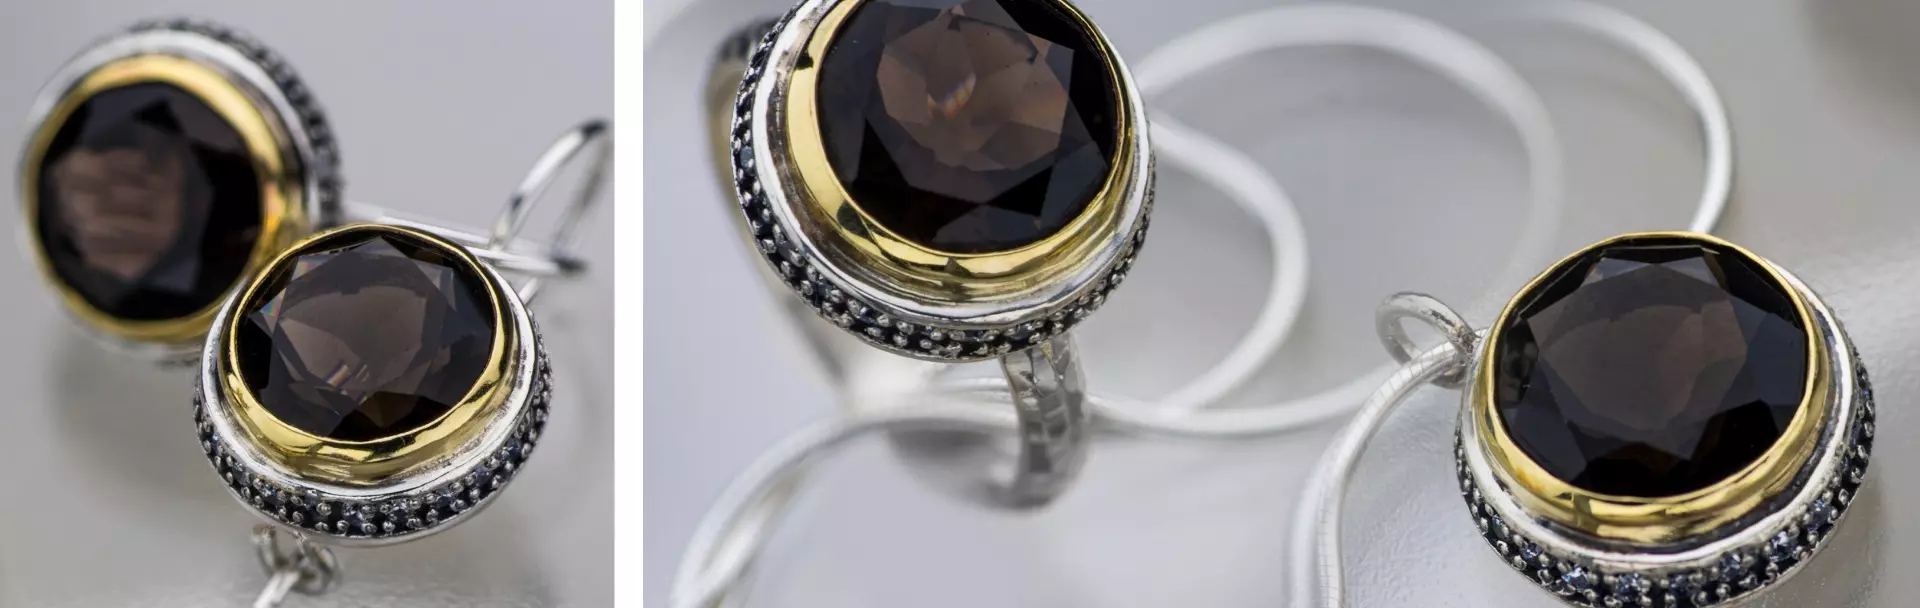 925 Sterling Silver Jewelry with Smoky Quartz and Zircon